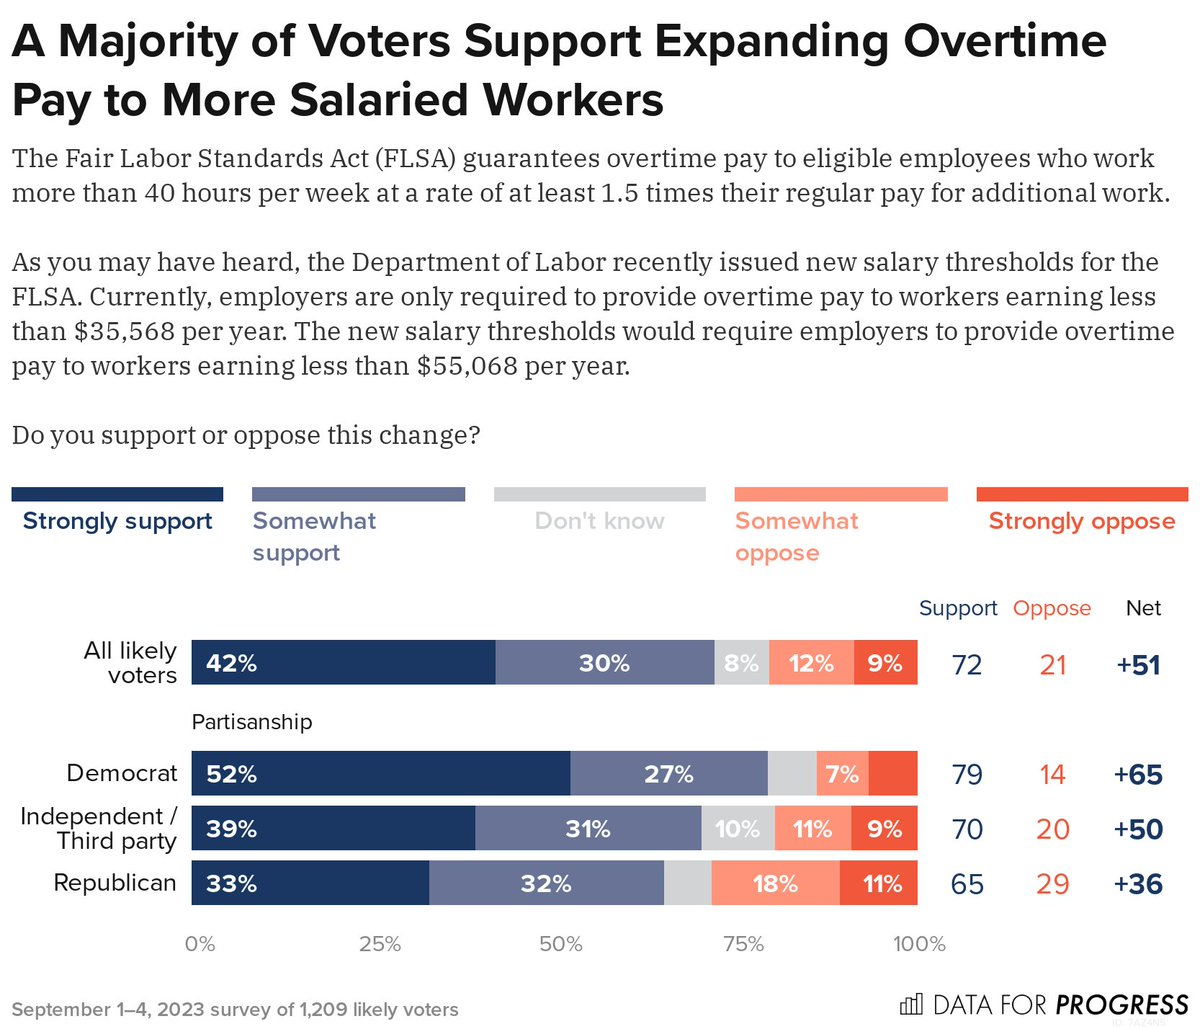 A majority of voters support expanding overtime pay to more salaried workers